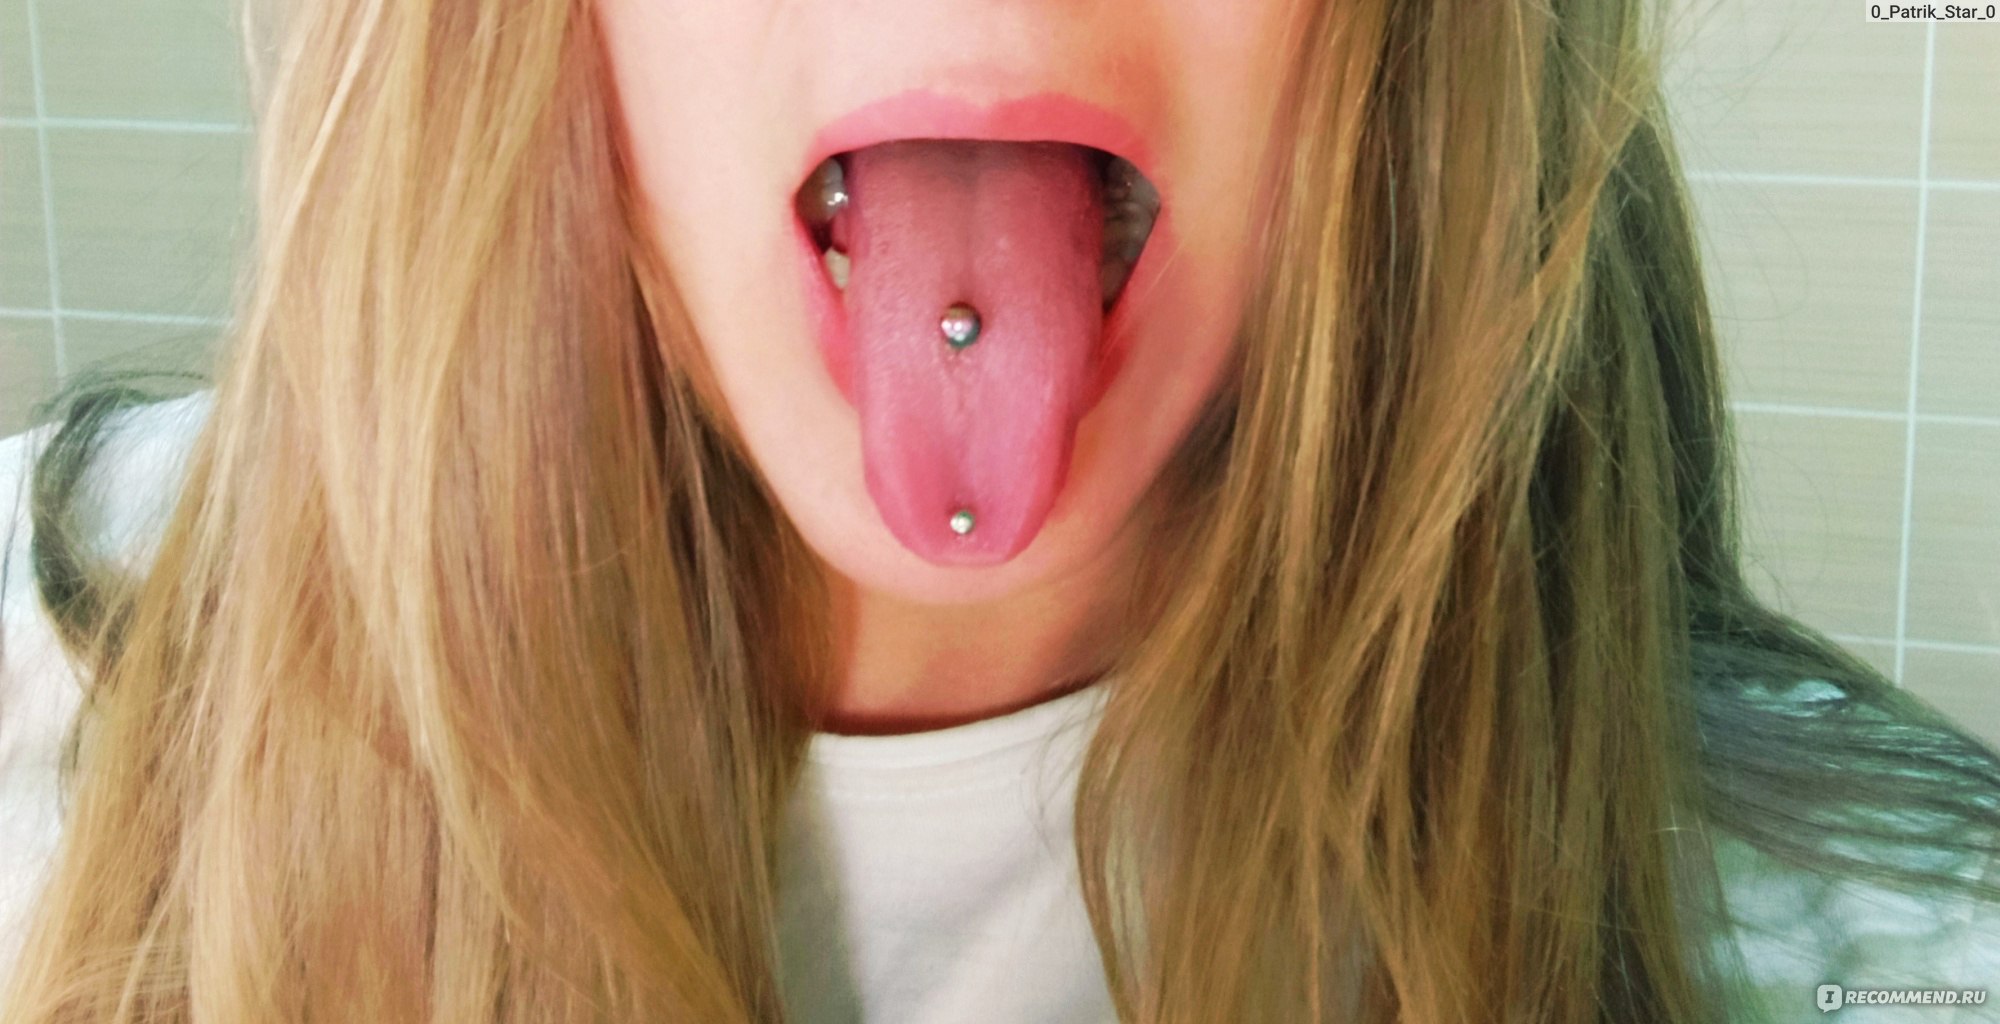 Tongue piercing gone wrong